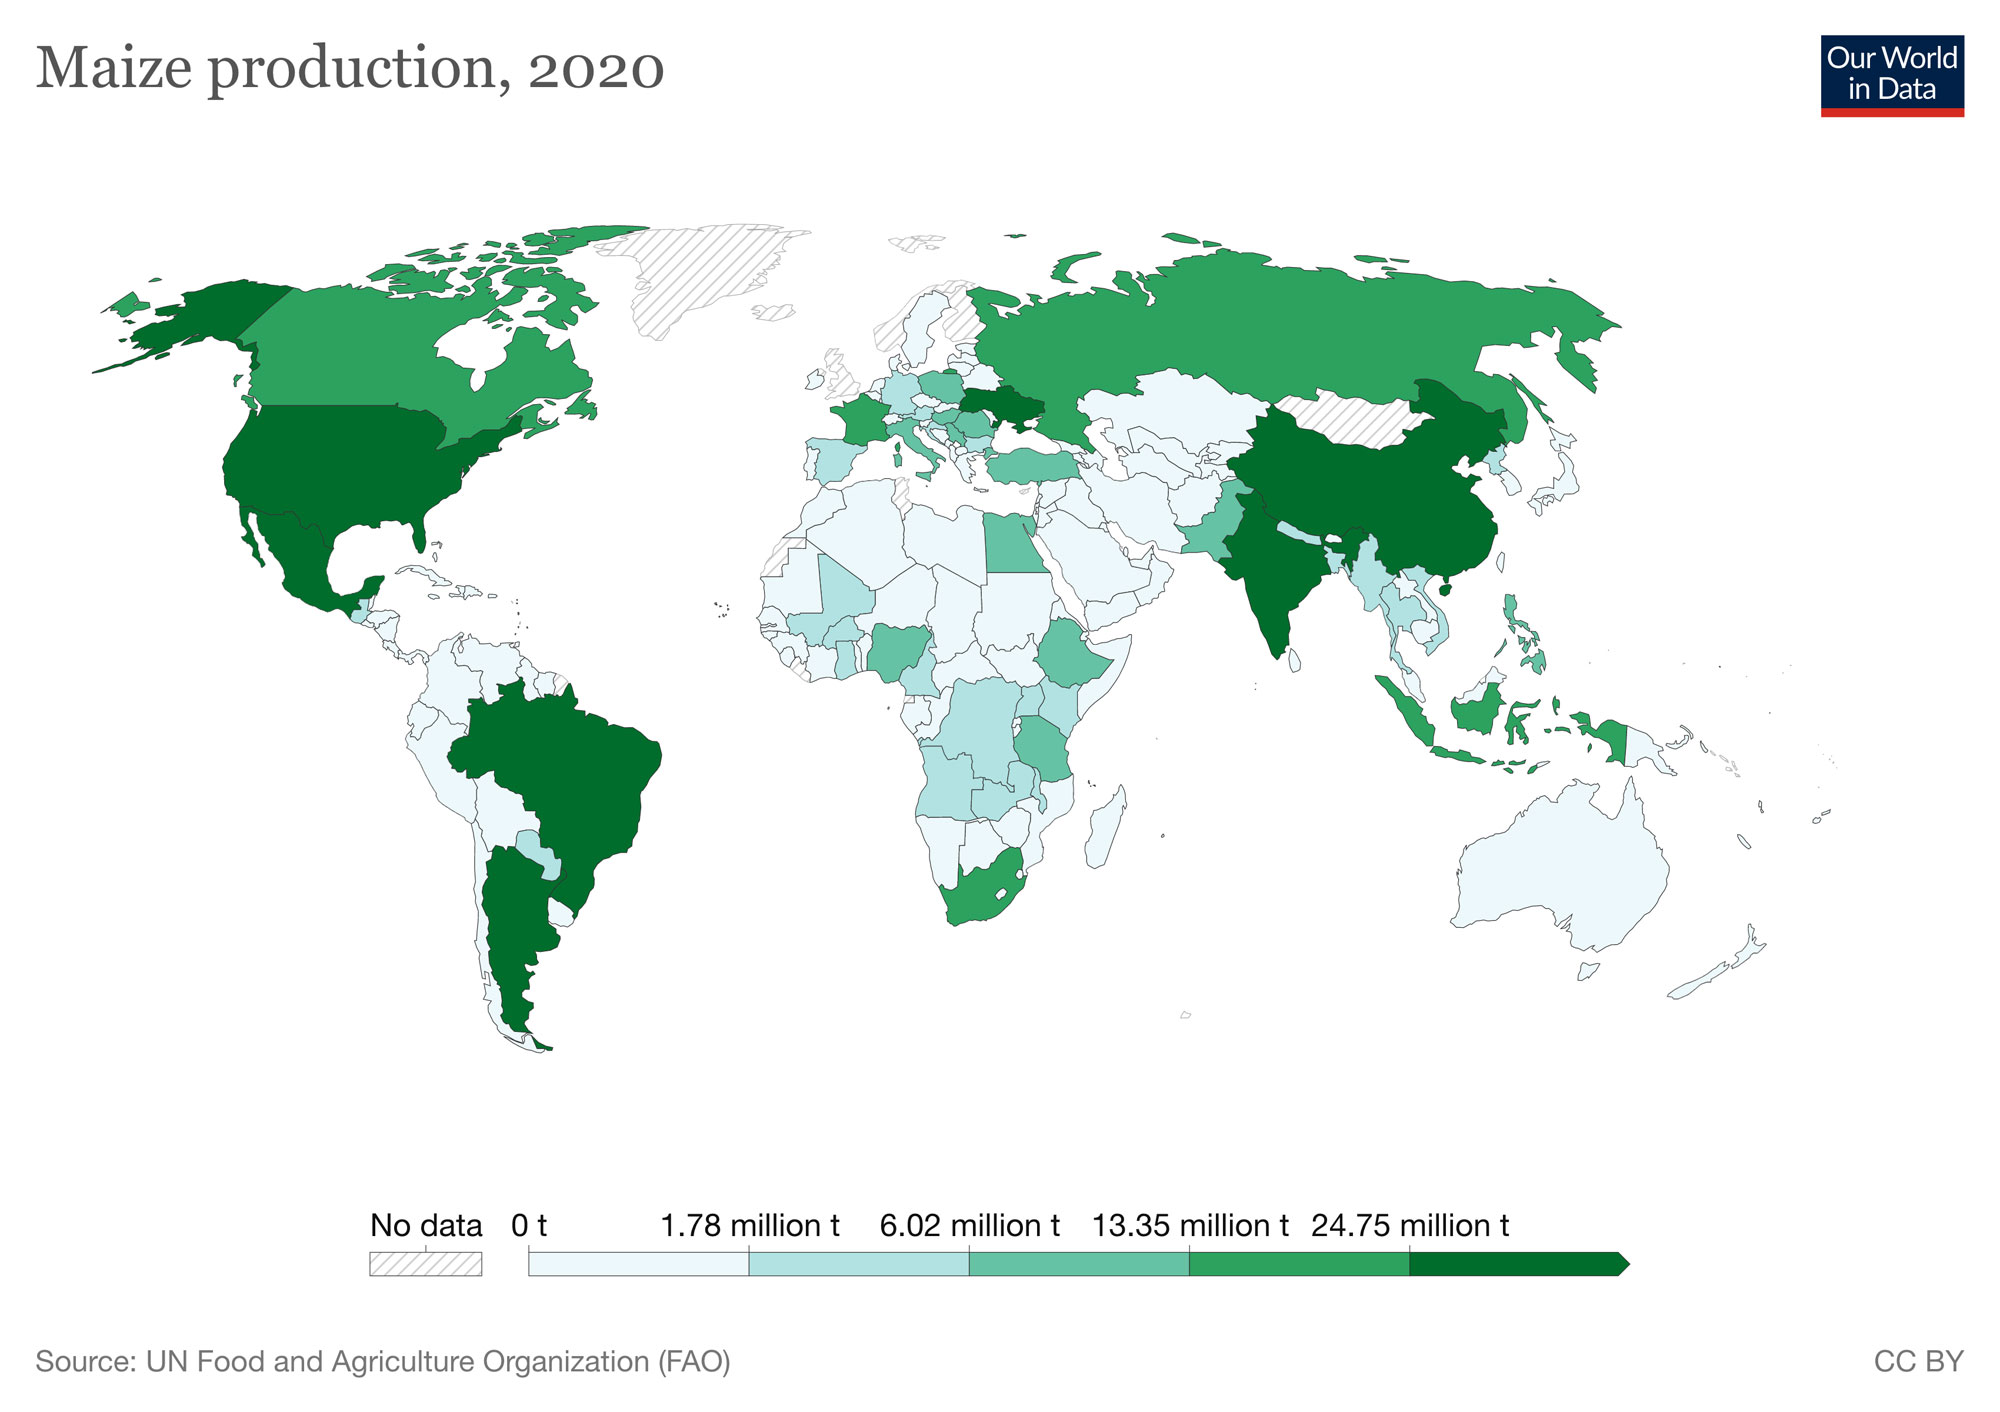 World map showing maize production in 2020. Countries are shaded lighter green to indicate less production, darker green to indicate more production. The top producers (dark green countries) are the U.S.A., Mexico, Argentina, Brazil, Ukraine, India, and China.